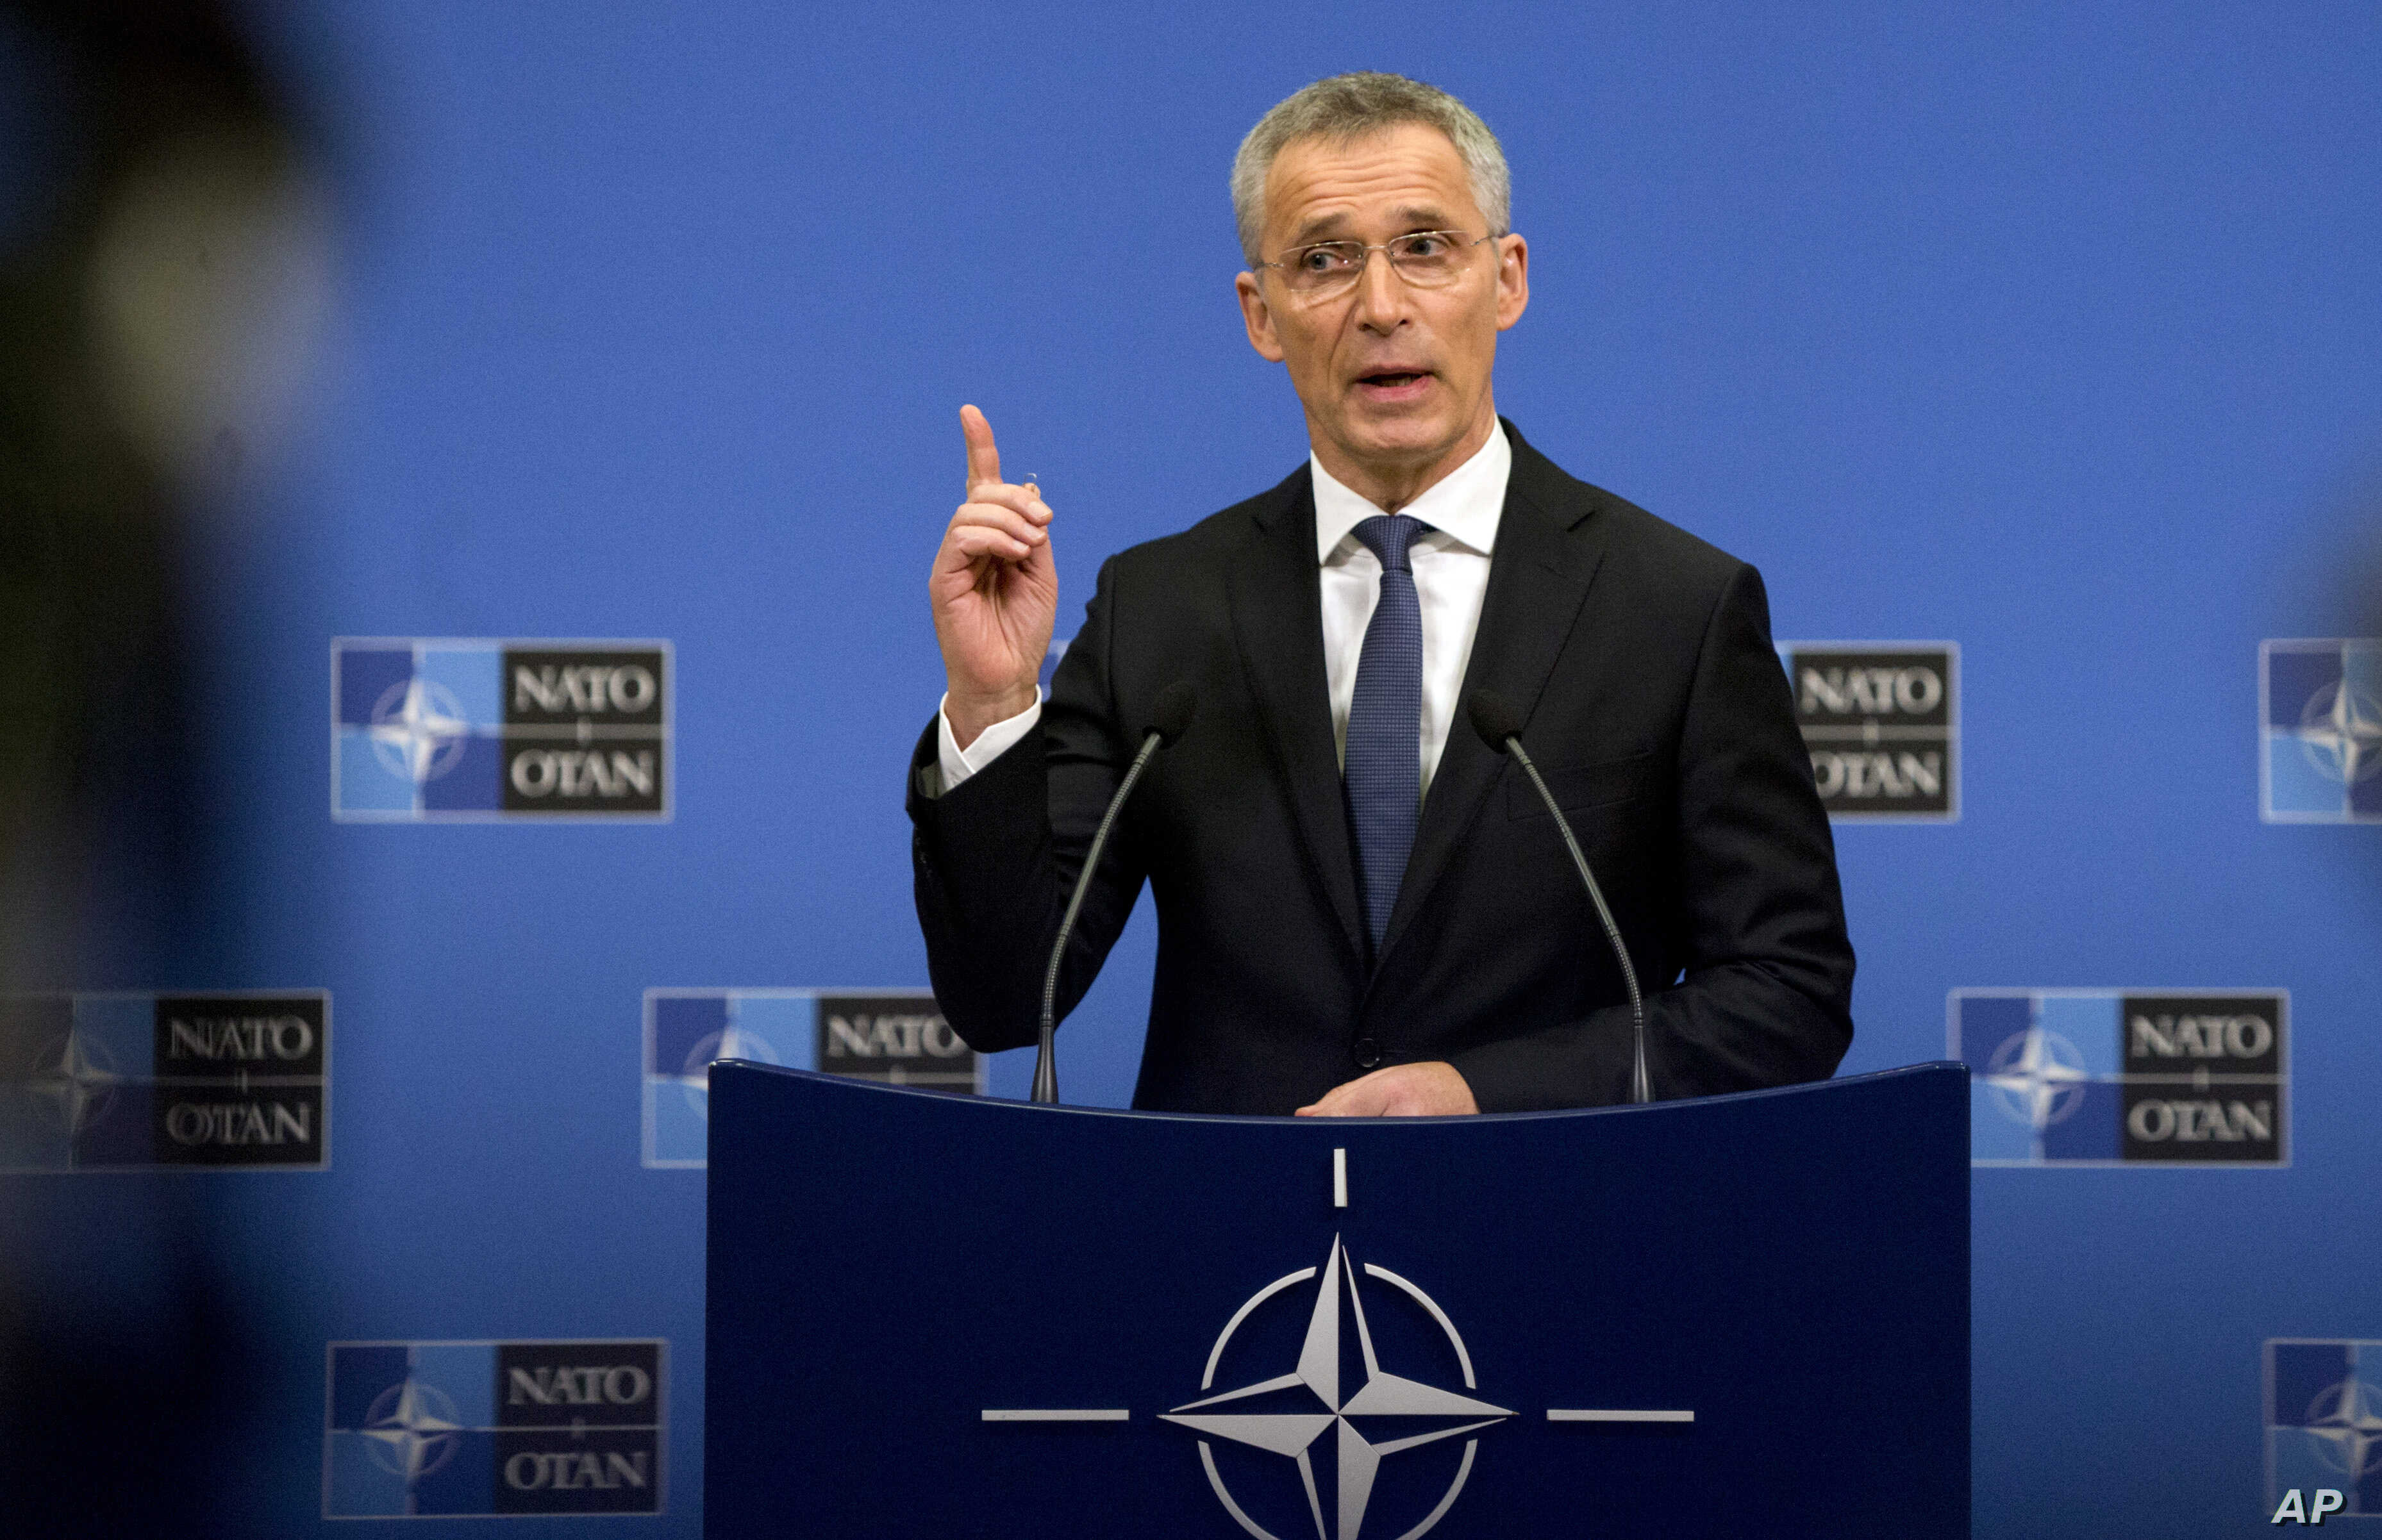 NATO Secretary General Jens Stoltenberg speaks during a media conference at NATO headquarters in Brussels, Monday, April 1, 2019. NATO foreign ministers mark in Washington on Thursday the 70th anniversary of the world's biggest security alliance amid heightened tensions with Russia and years of military stalemate in Afghanistan. (AP Photo/Virginia Mayo)